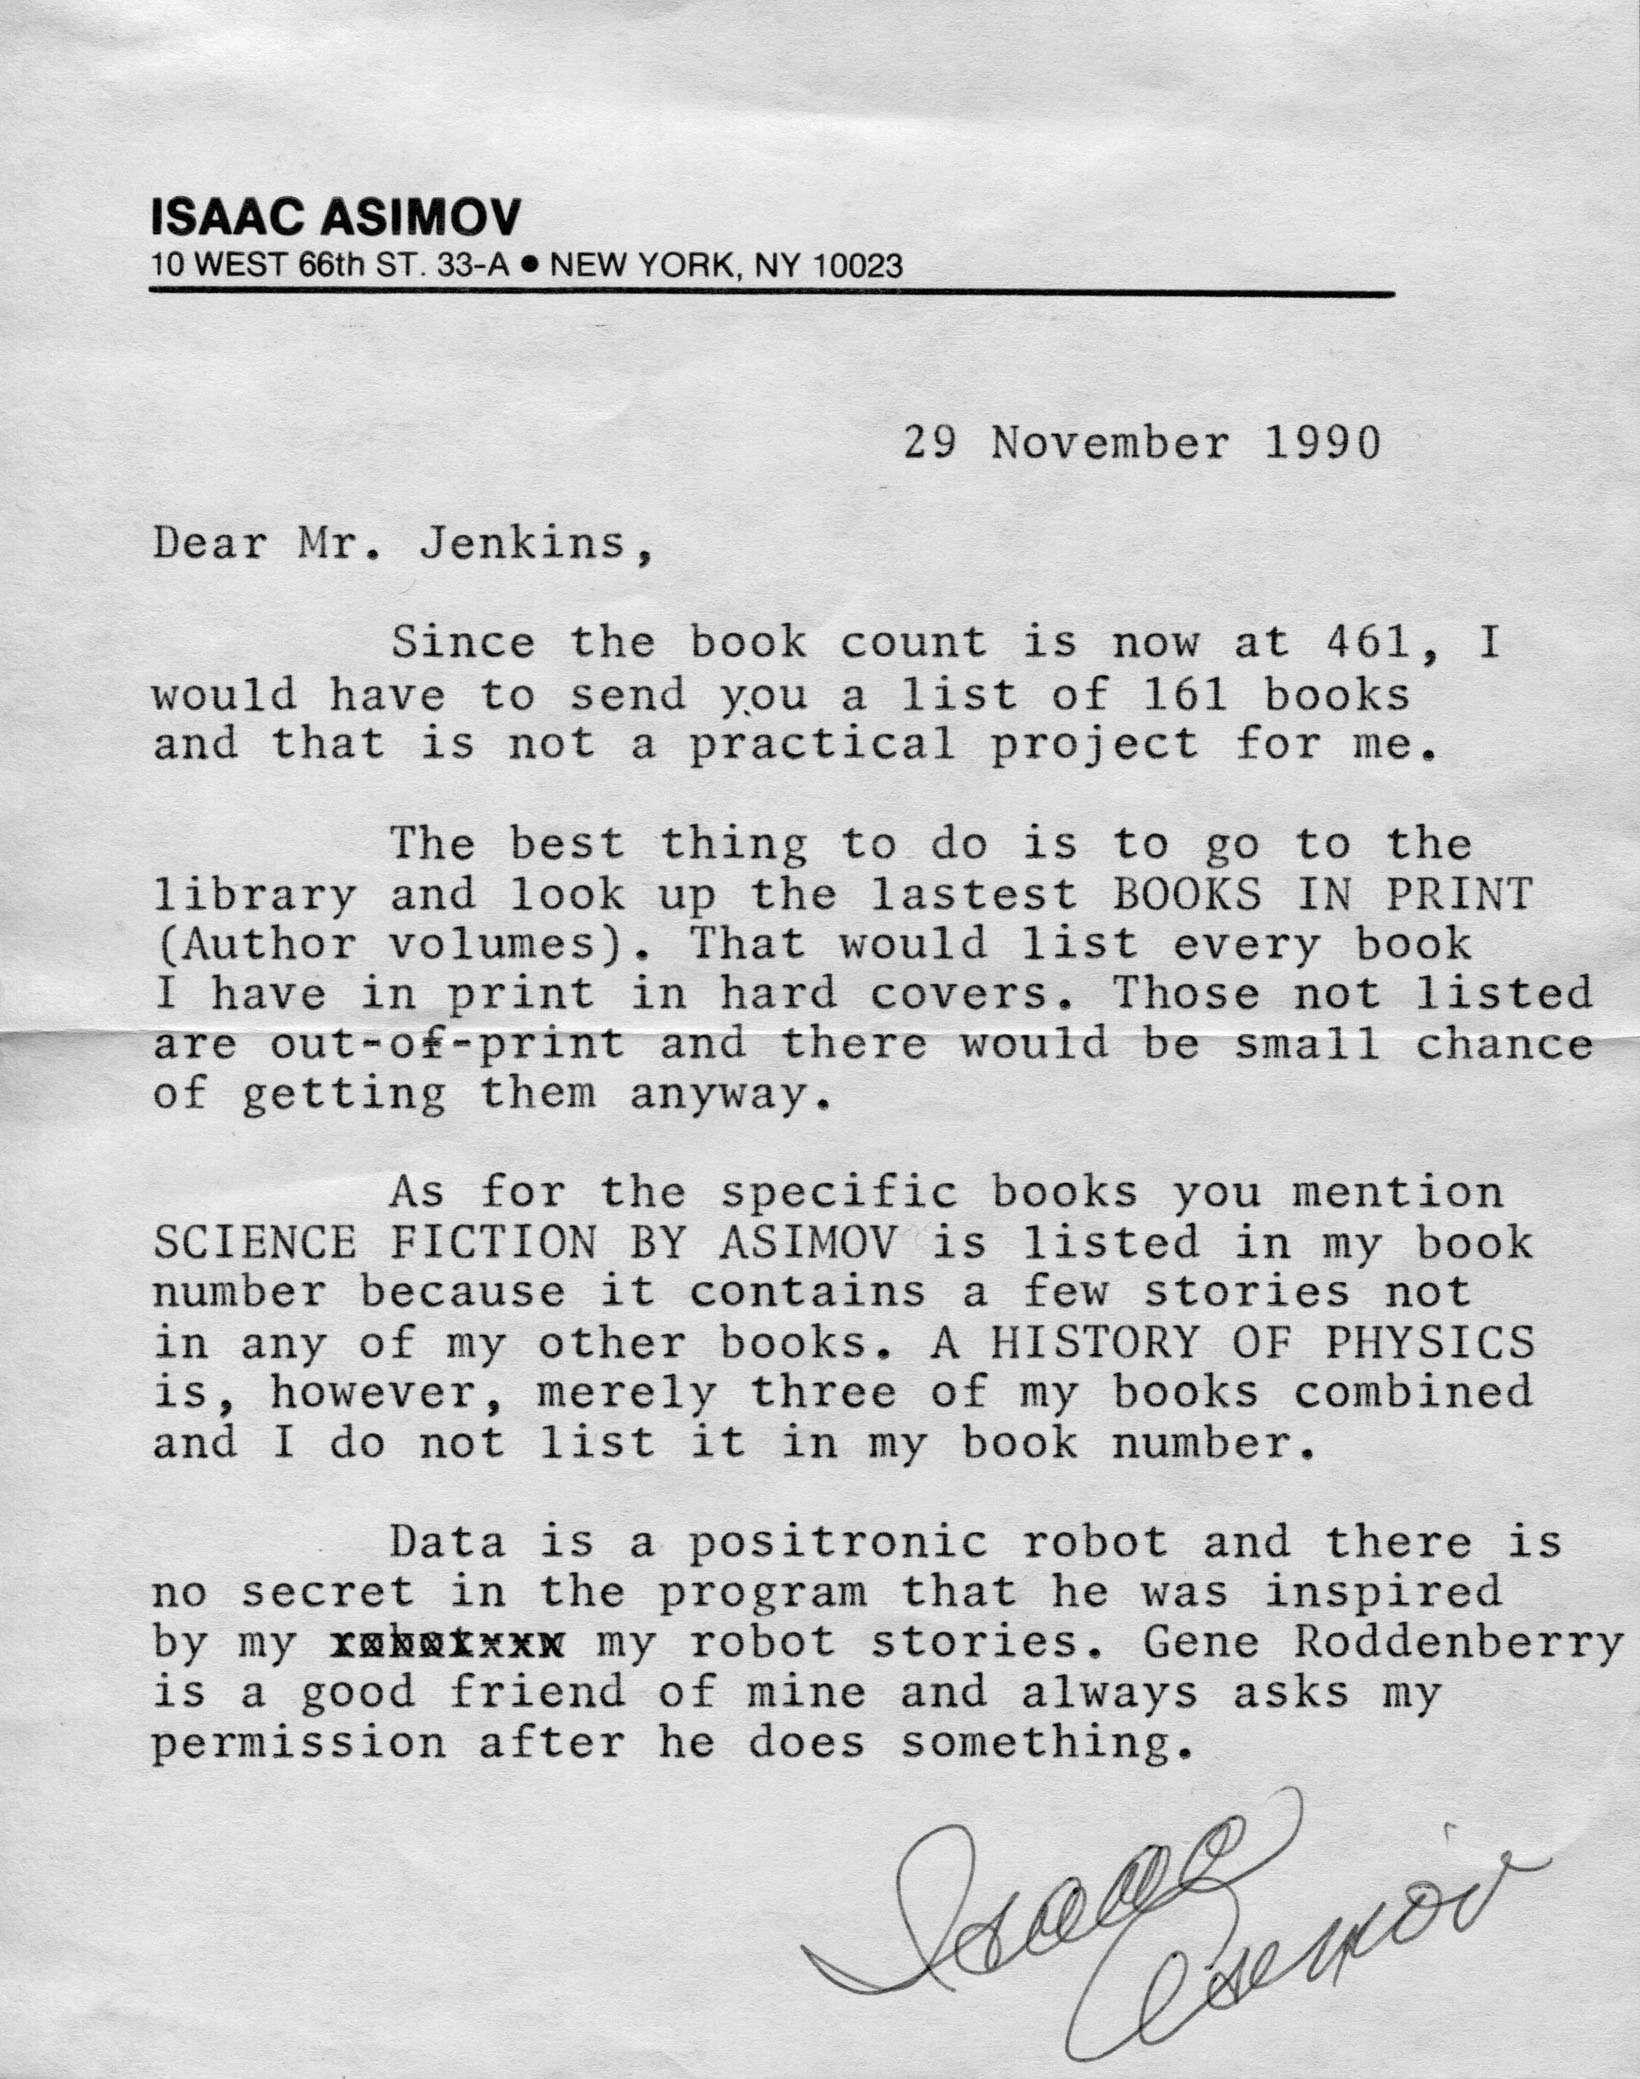 29 November 1990. Dear Mr. Jenkins, Since the book count is now at 461, I would have to send you a list of 161 books and that is not a practical project for me. The best thing to do is to go to the library and look up the lastest BOOKS IN PRINT (Author volumes). That would list every book I have in print in hard covers. Those not listed are out-of-print and there would be small chance of getting them anyway. As for the specific books you mention SCIENCE FICTION BY ASIMOV is listed in my book number because it contains a few stories not in any of my other books. A HISTORY OF PHYSICS and is, however, merely three of my books combined and I do not list it in my book number. Data is a positronic robot and there is no secret in the program that he was inspired by my robot stories. Gene Roddenberry is a good friend of mine and always asks my permission after he does something. Isaac Asimov